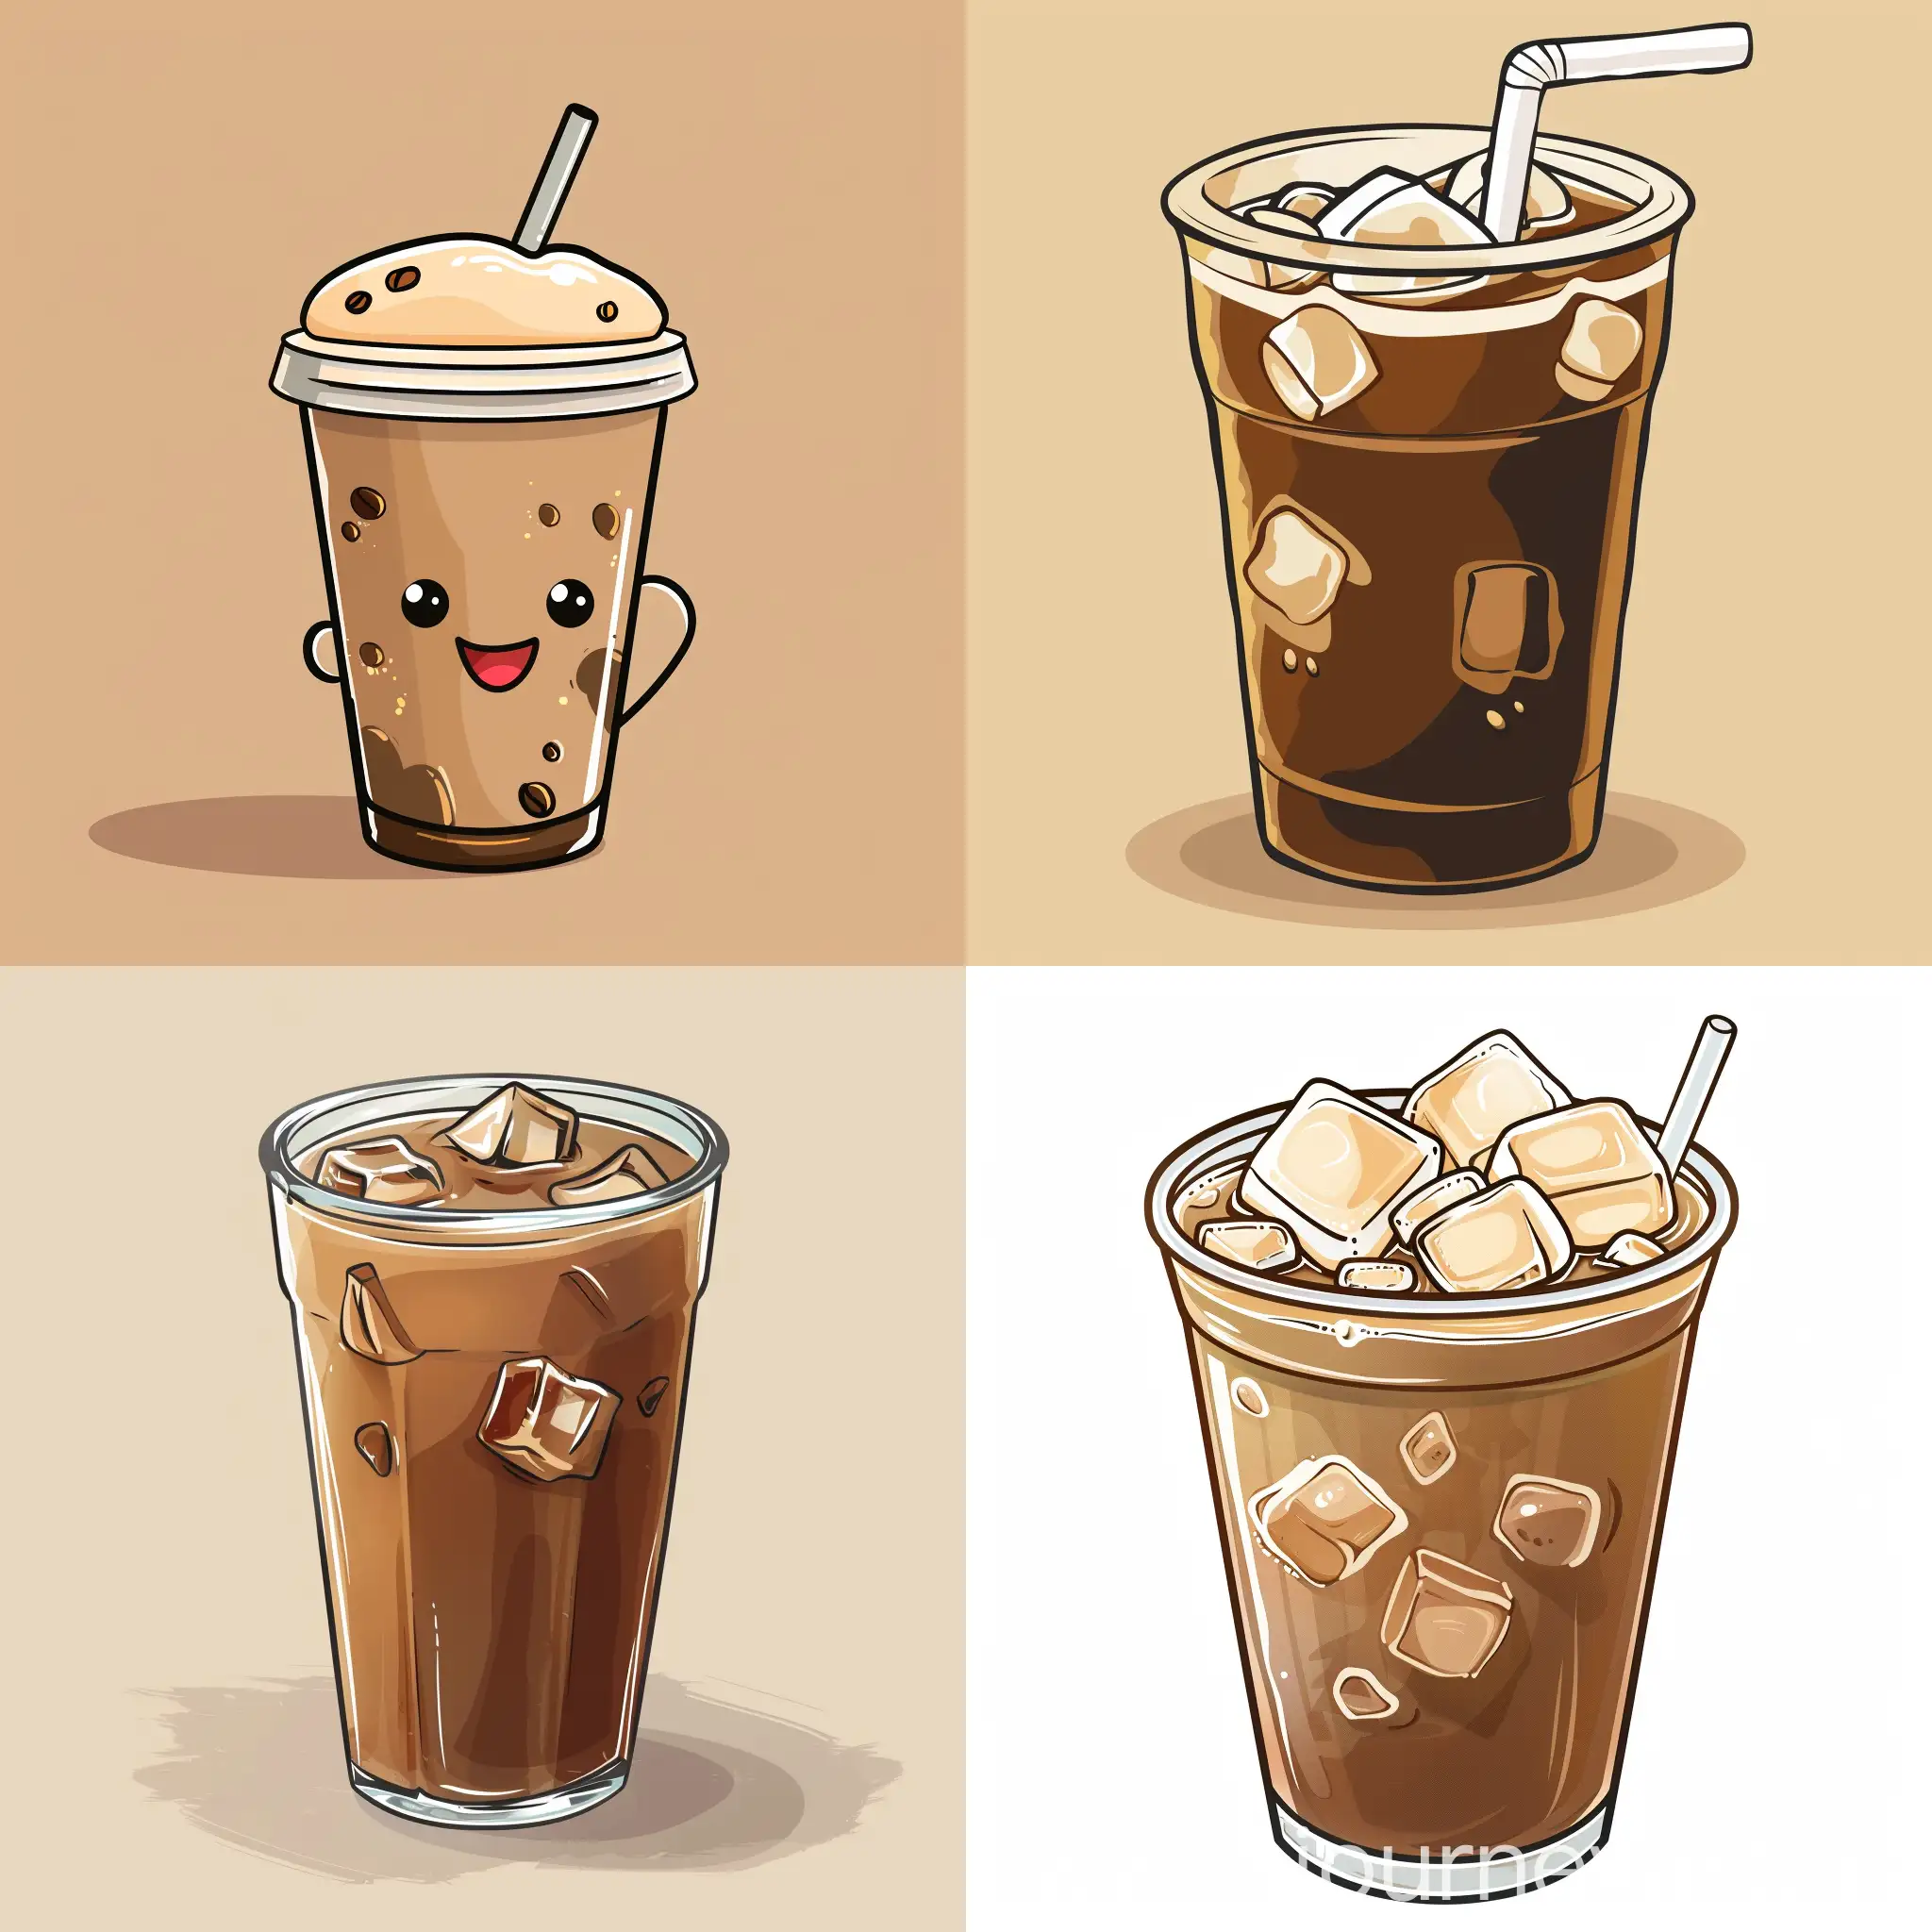 Whimsical-Iced-Coffee-Cartoon-with-Vibrant-Colors